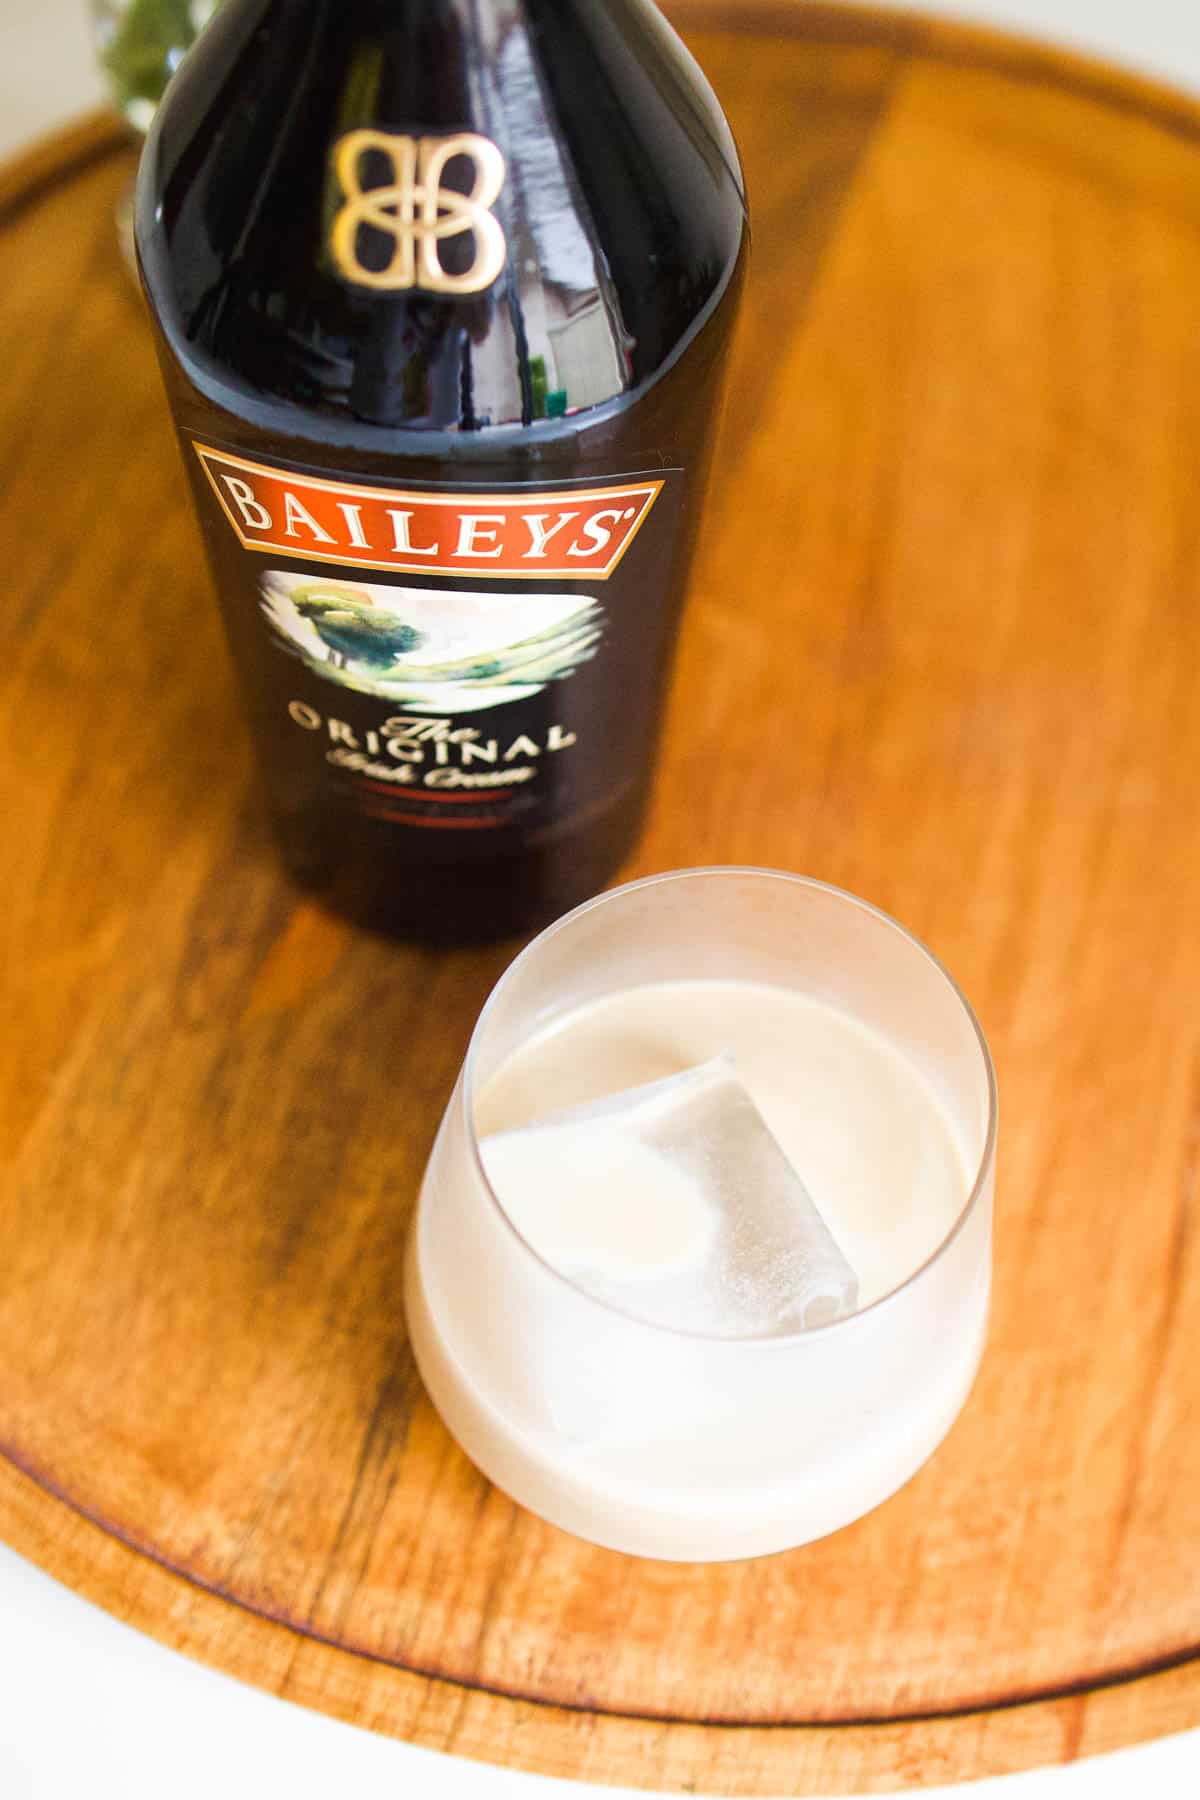 A glass on a wooden tray with a large ice cube and Baileys Irish Cream next to a bottle of Baileys.